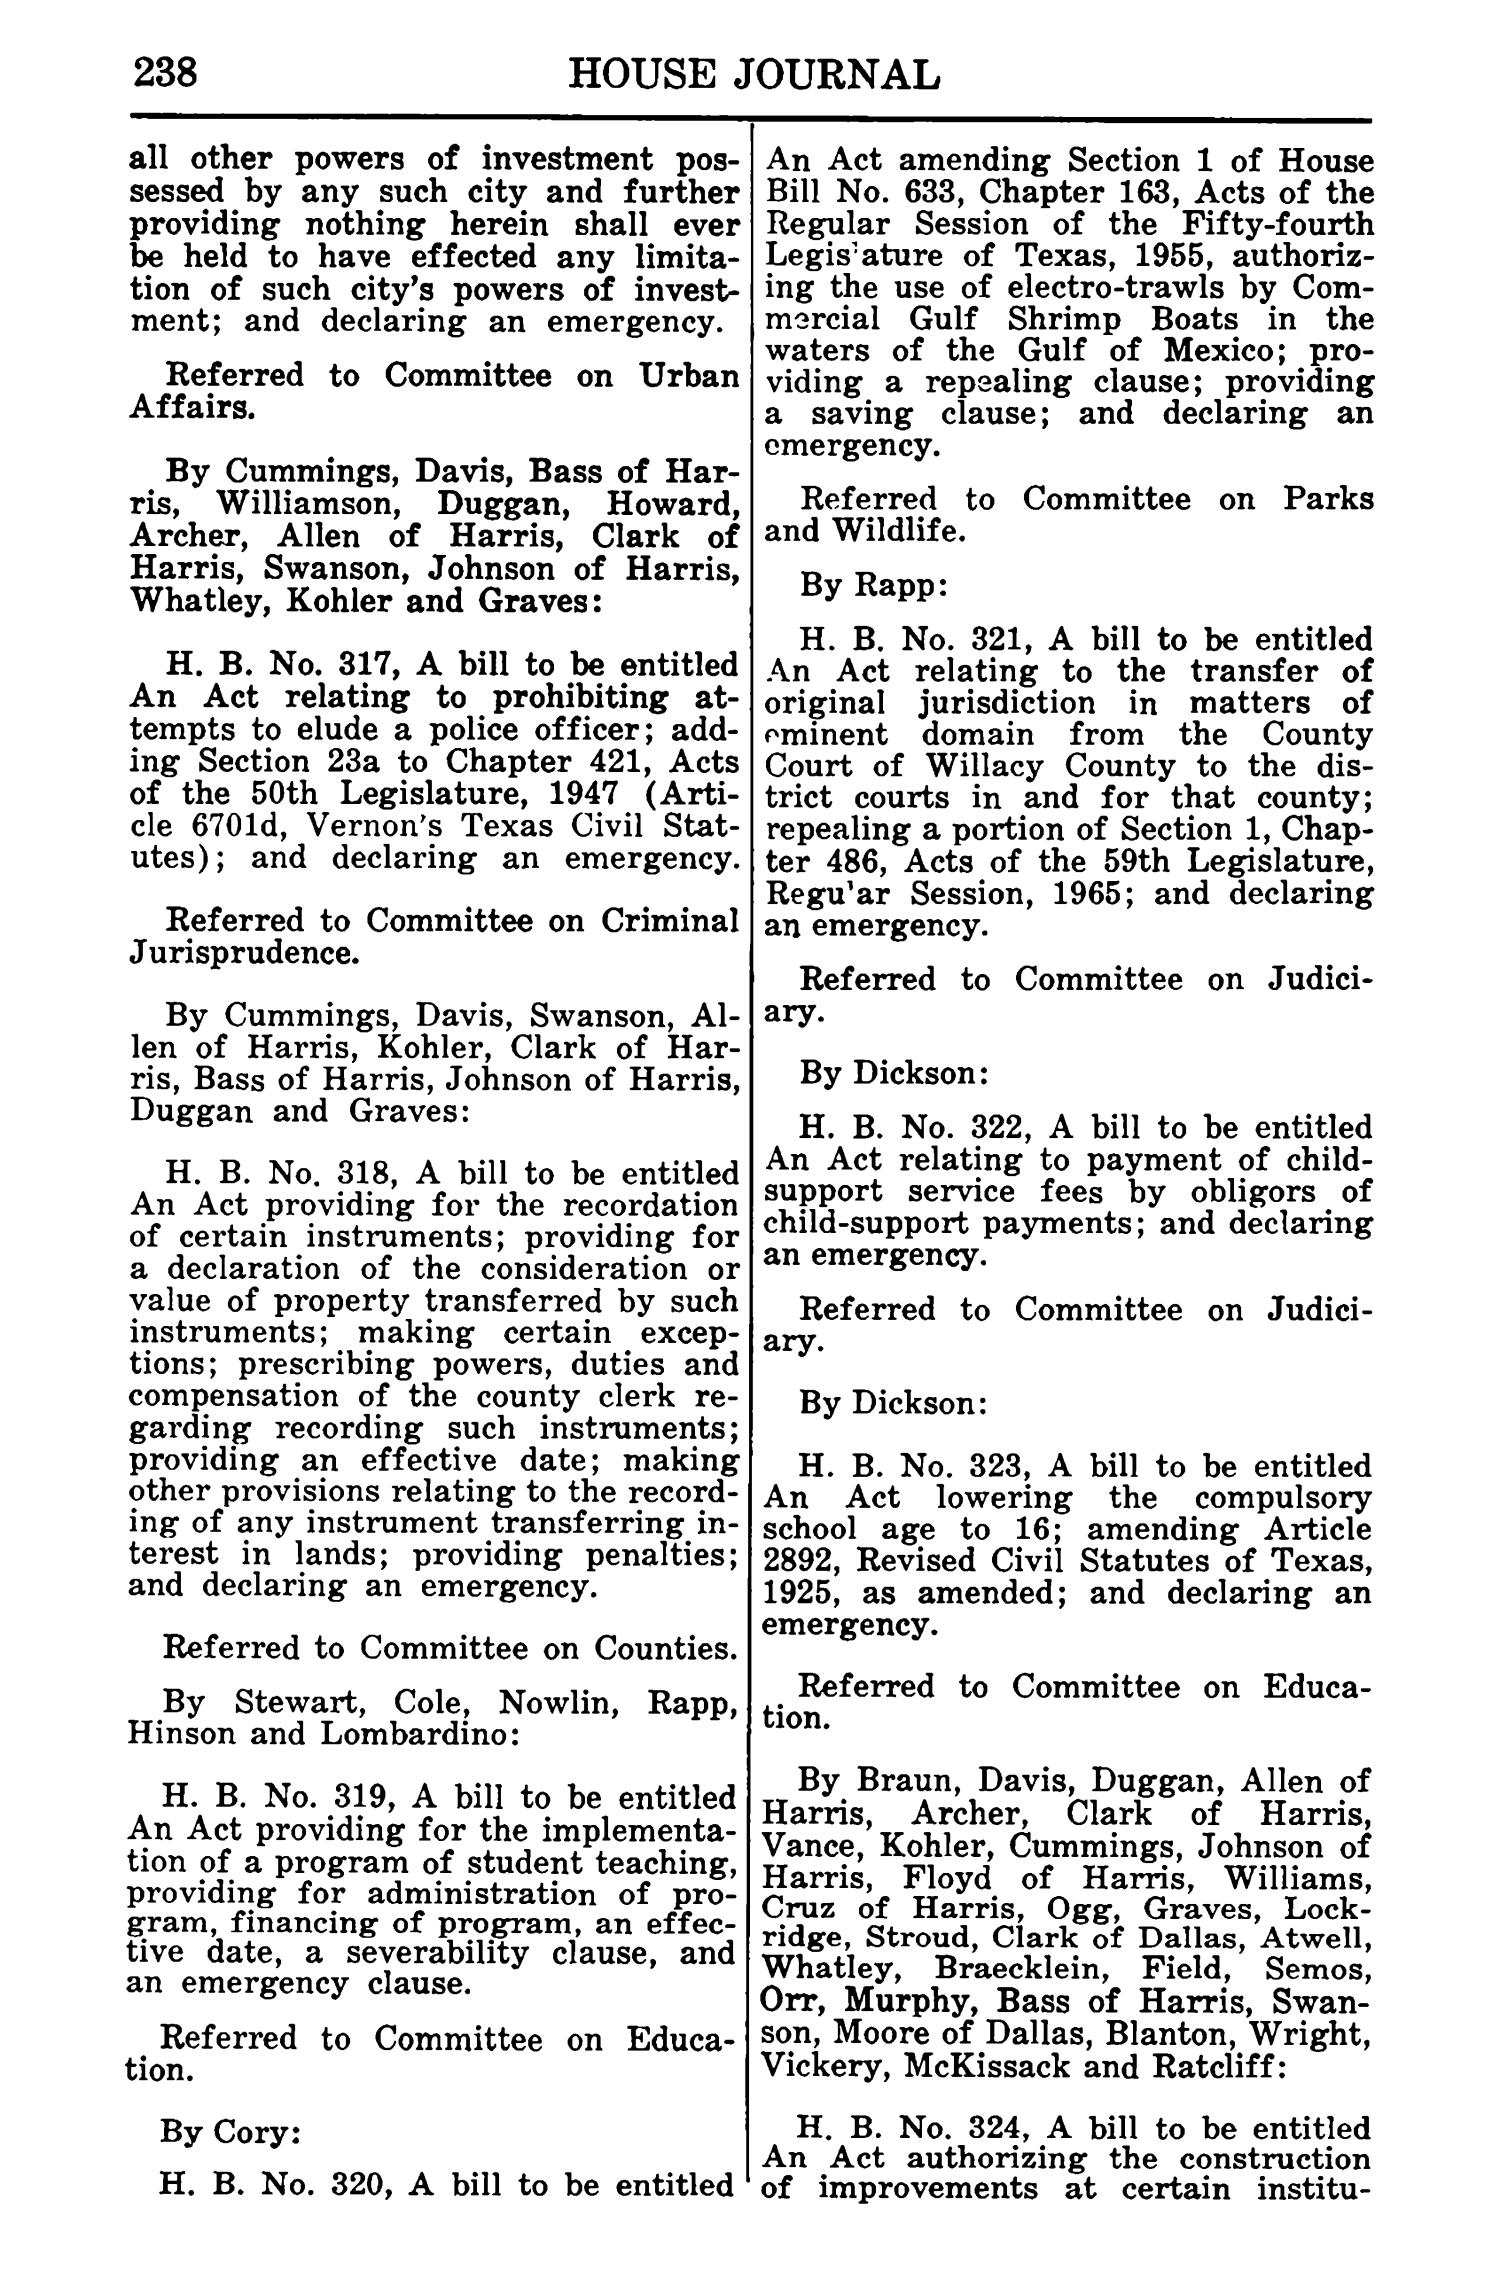 Journal of the House of Representatives of the Regular Session of the Sixtieth Legislature of the State of Texas, Volume 1
                                                
                                                    238
                                                